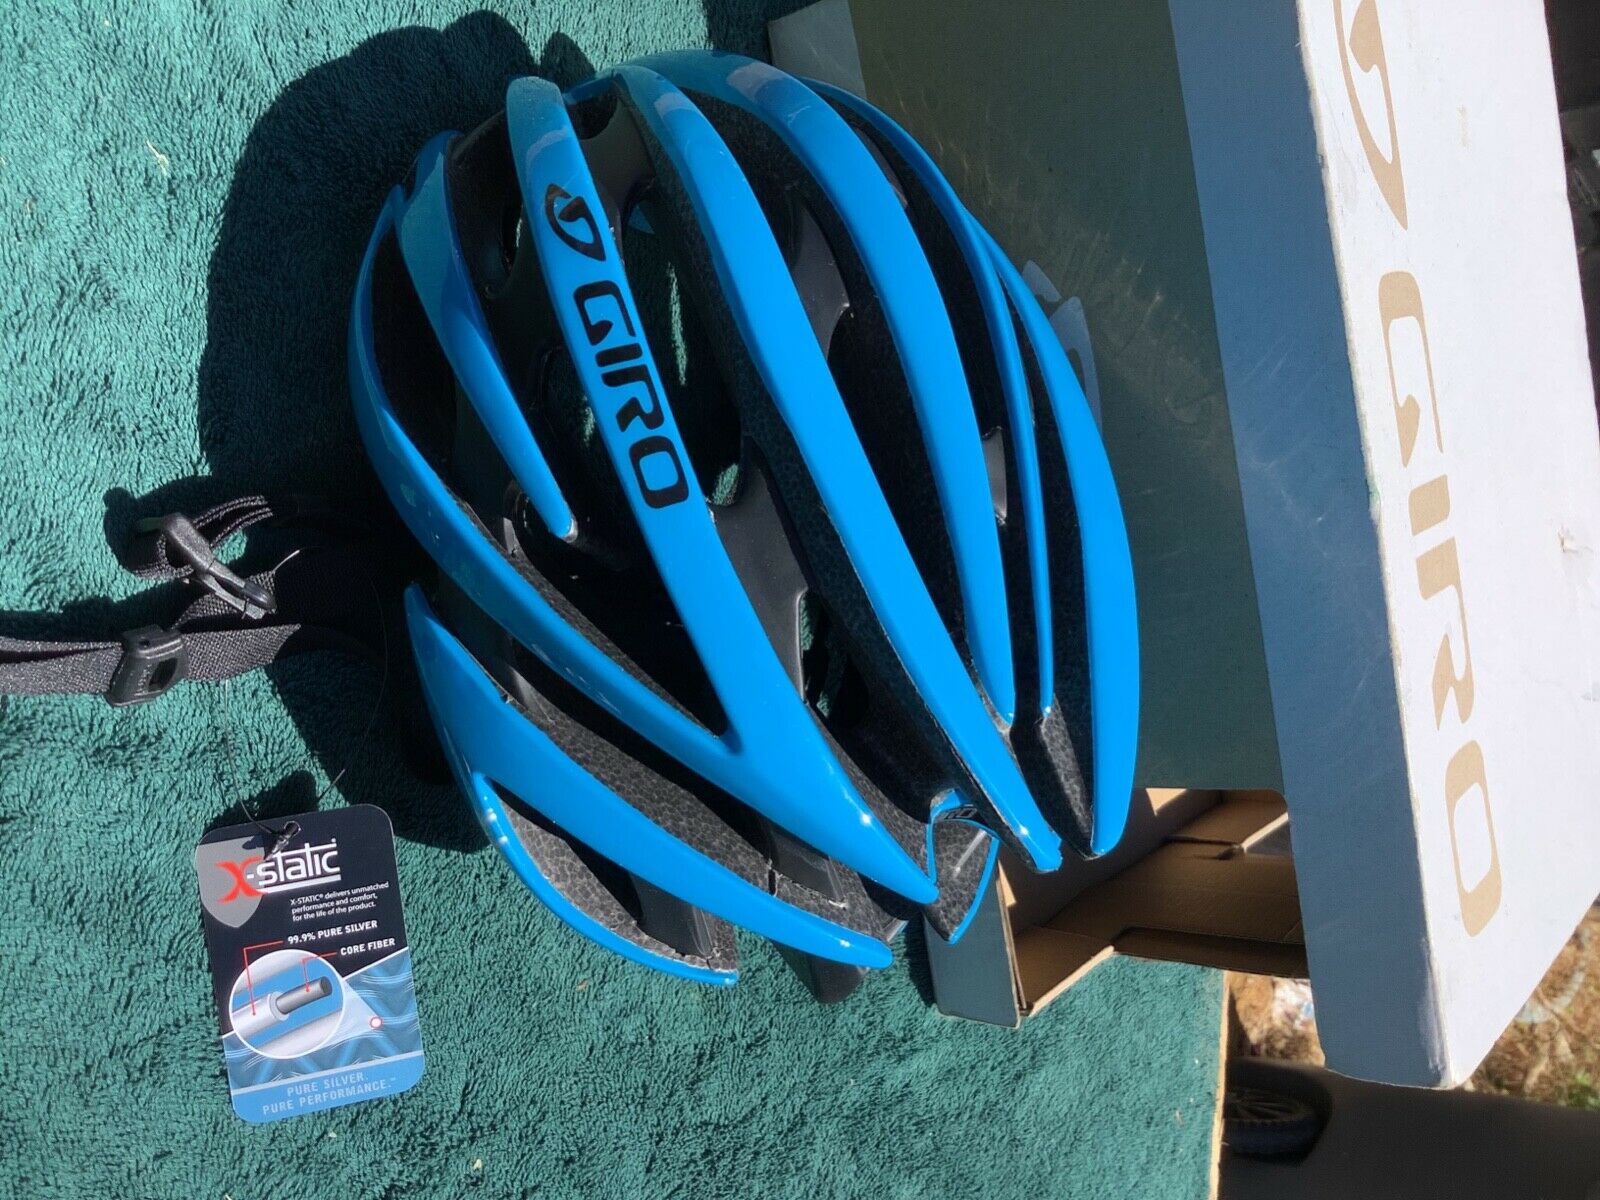 Giro Aeon Bike Helmet, Size Small, Color Blue. New In Box With Tags.